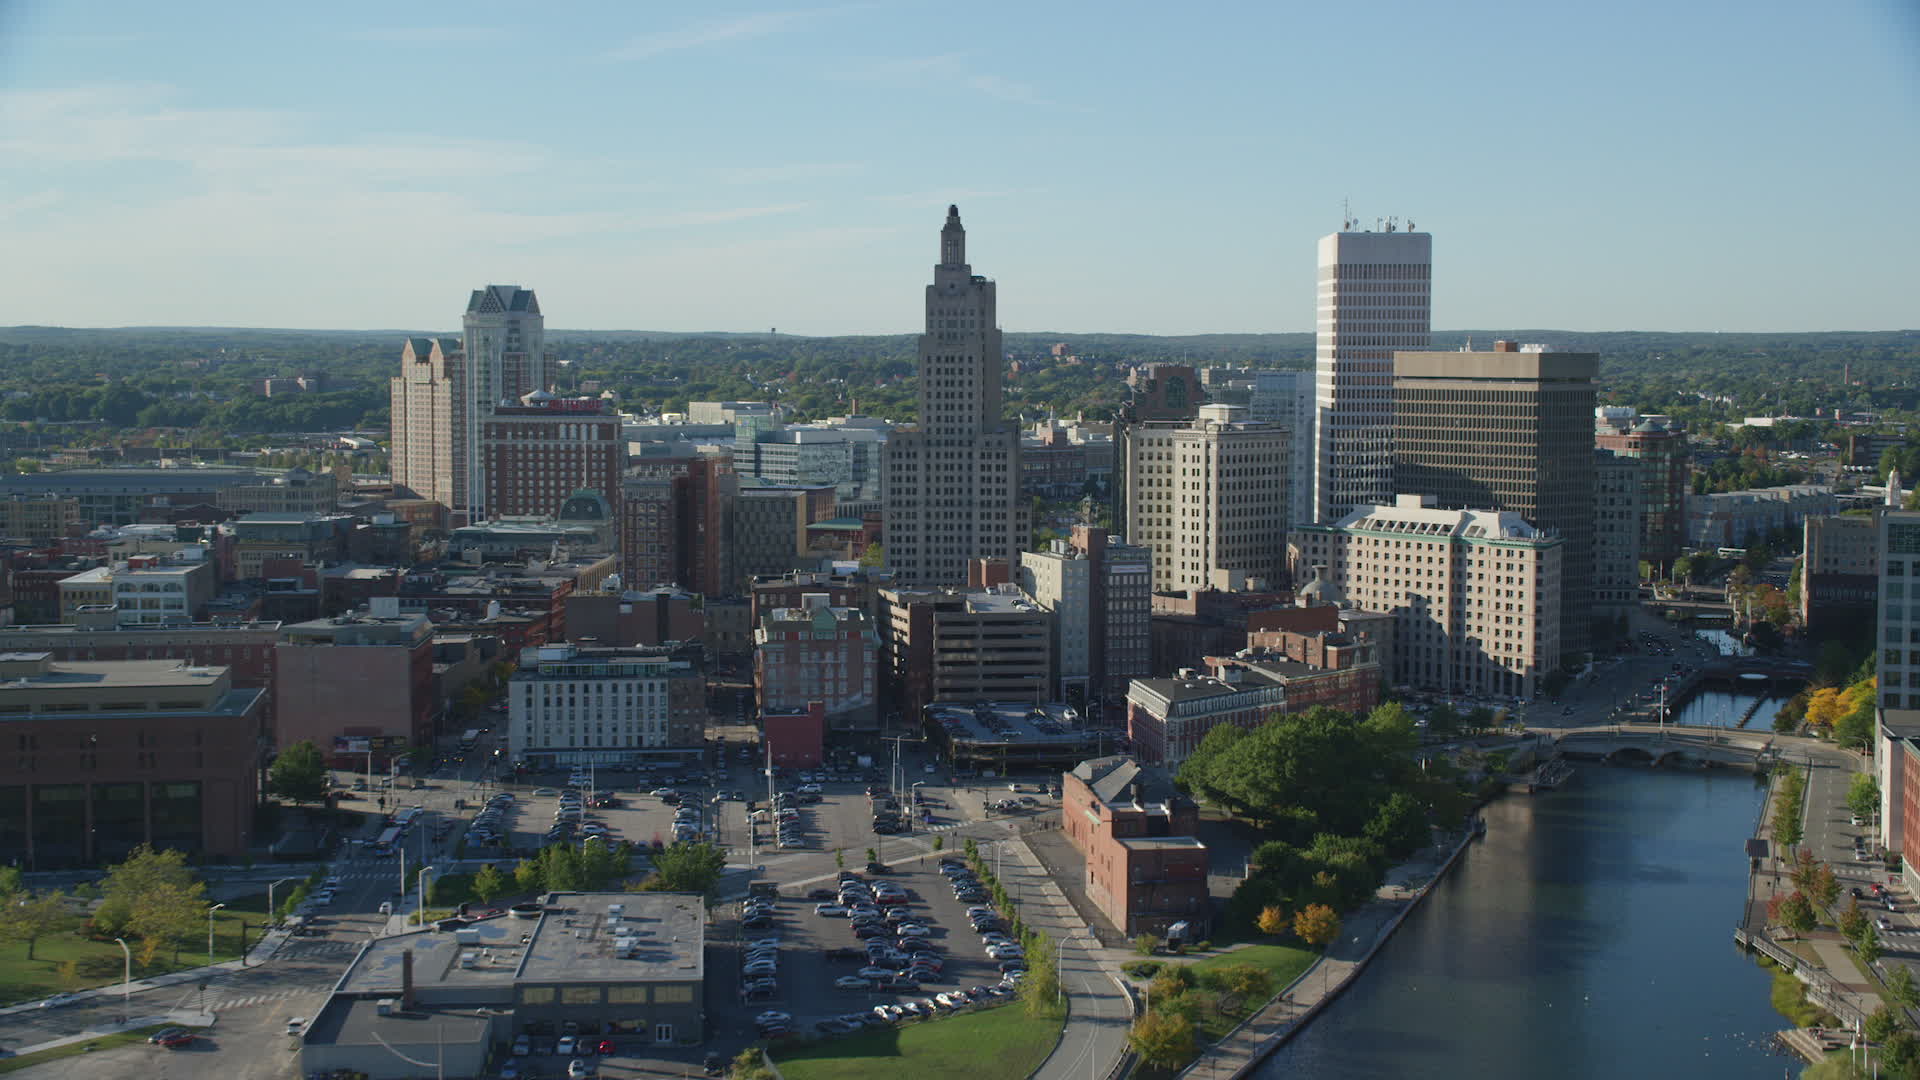 6k stock footage aerial video flying over river, approaching Downtown Providence, Rhode Island Aerial Stock Footage AX145_035